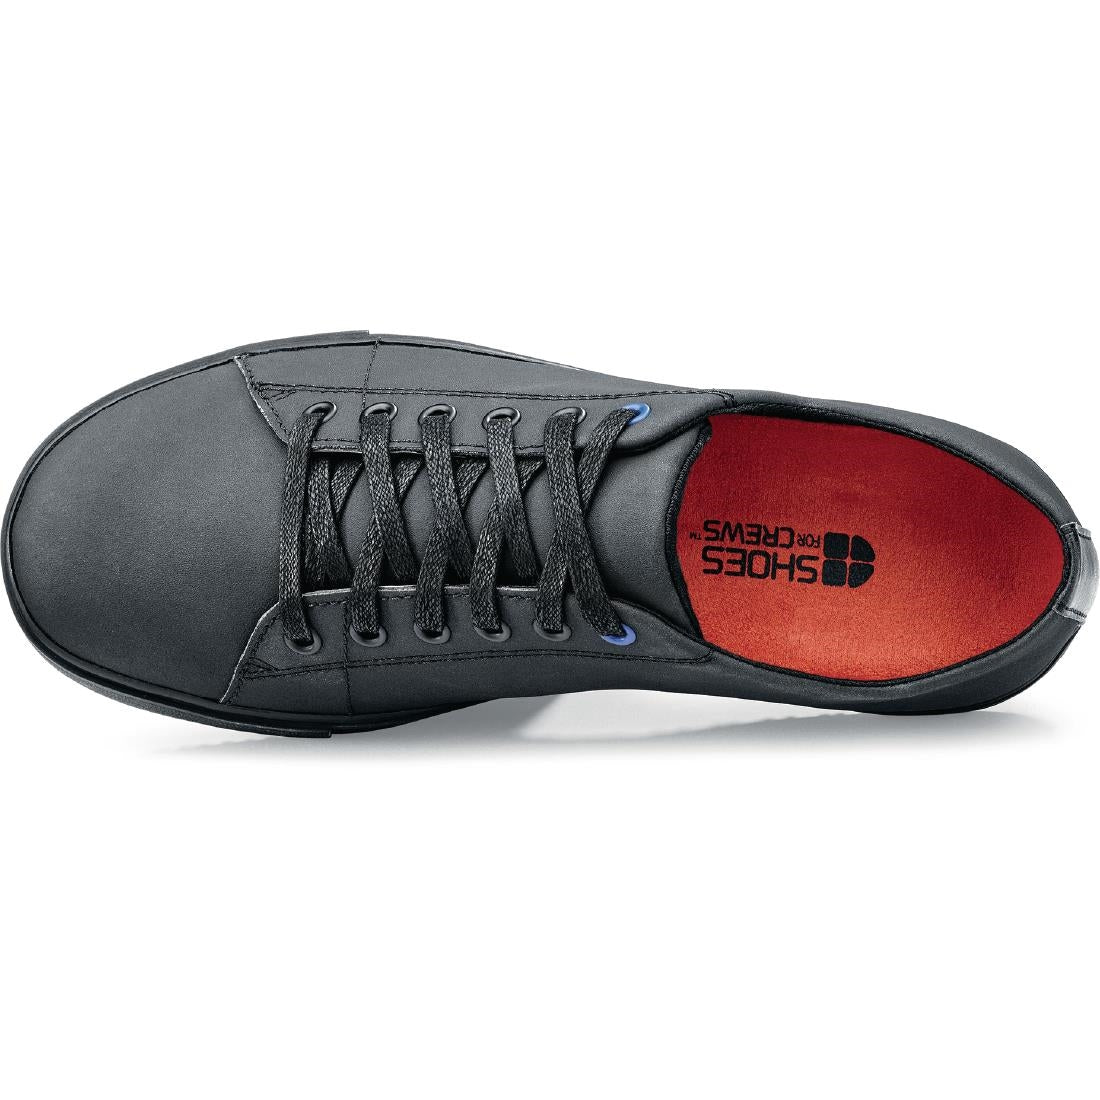 Shoes for Crews Mens Old School Trainer